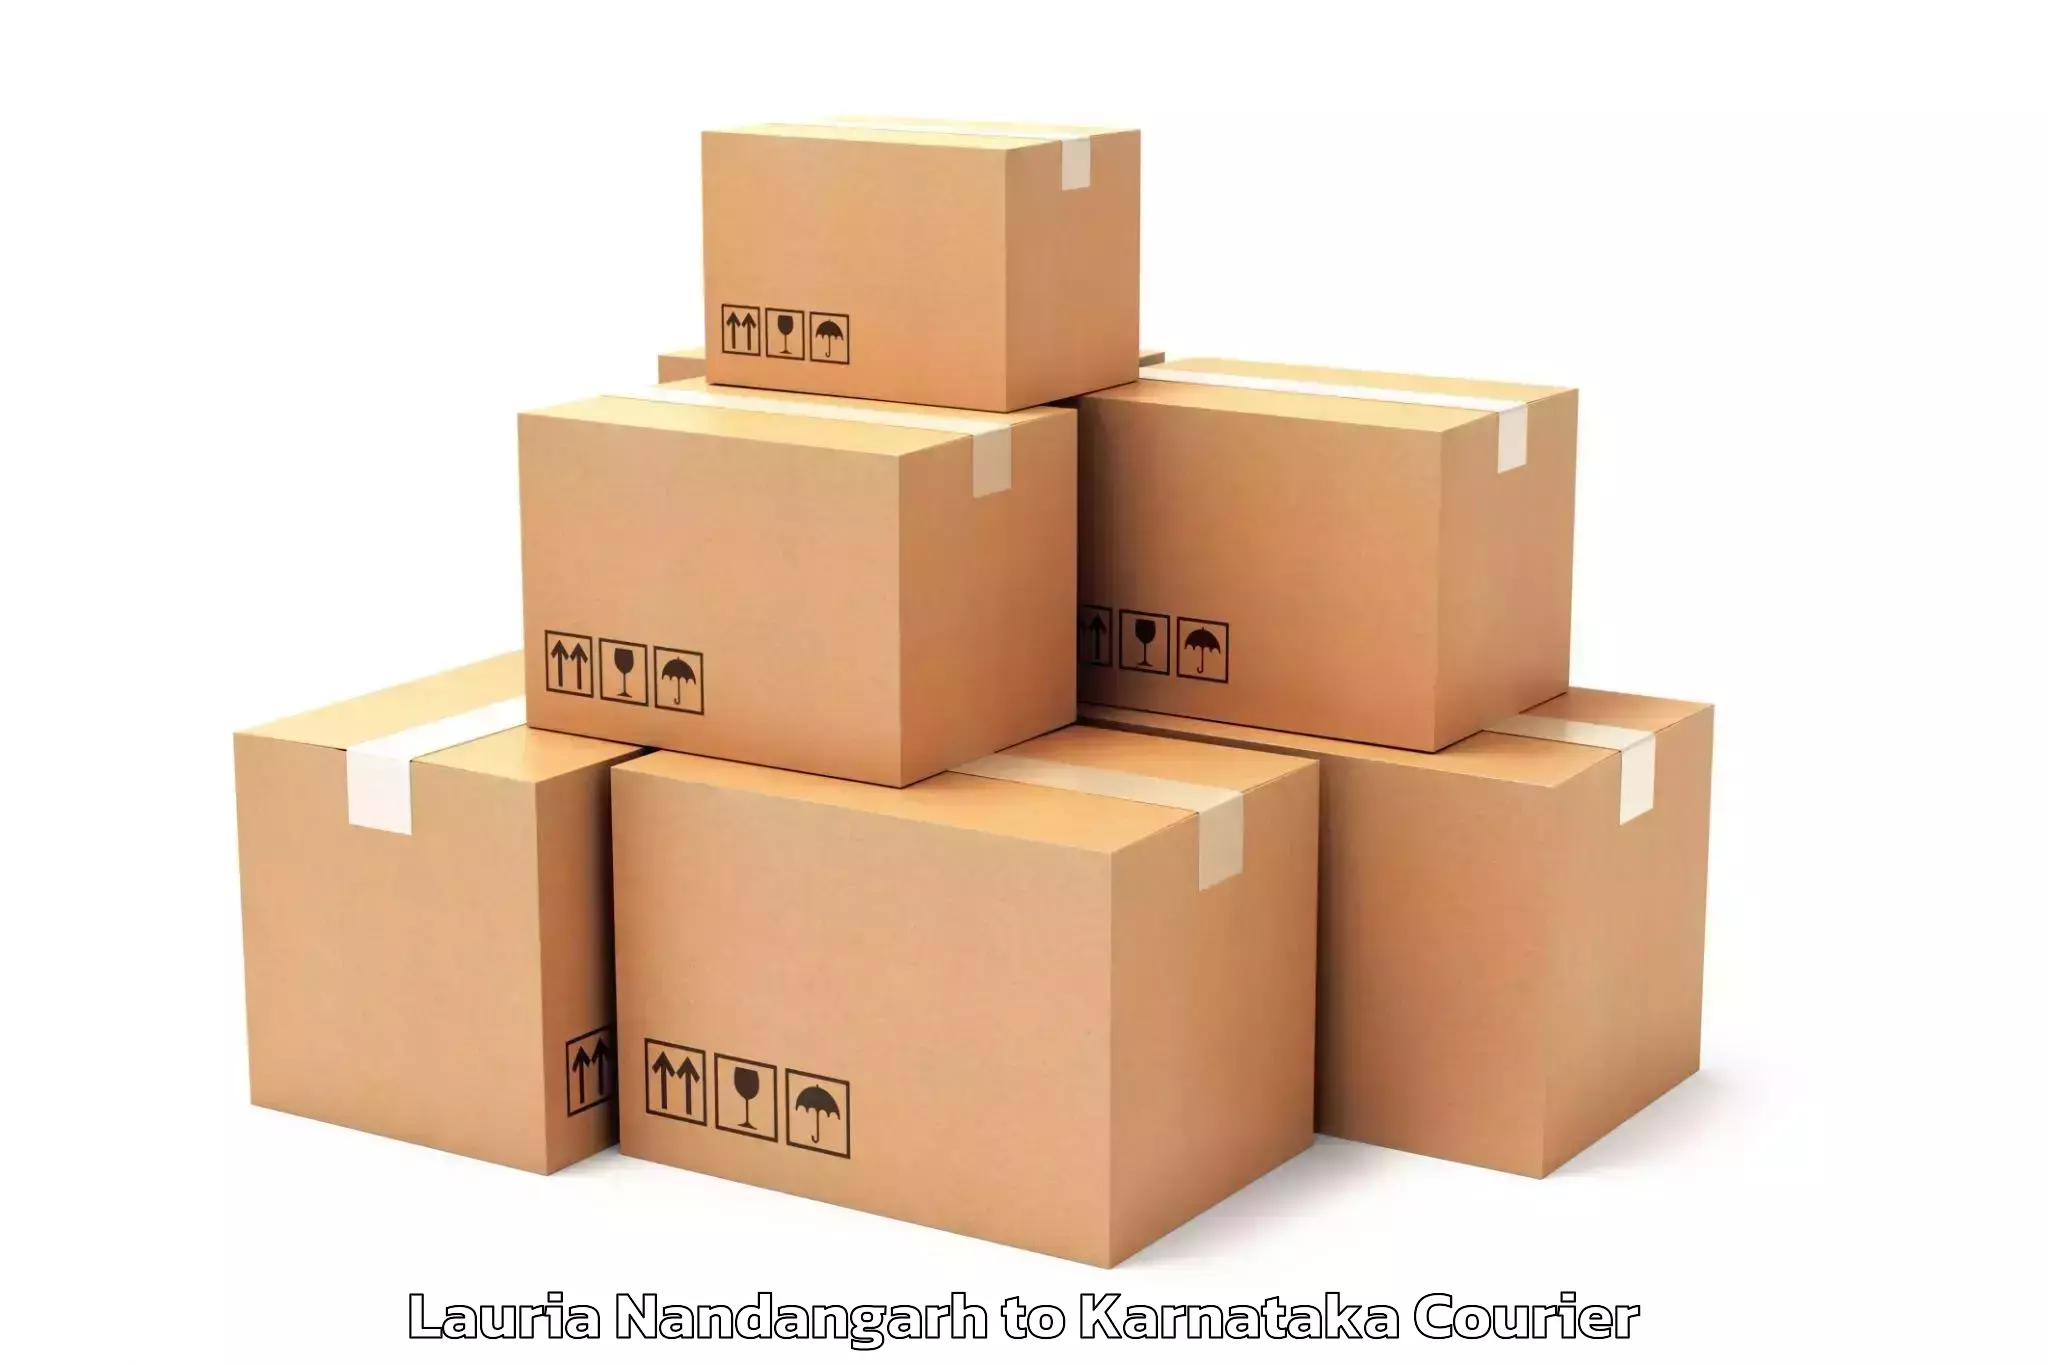 Professional relocation services Lauria Nandangarh to Yellapur